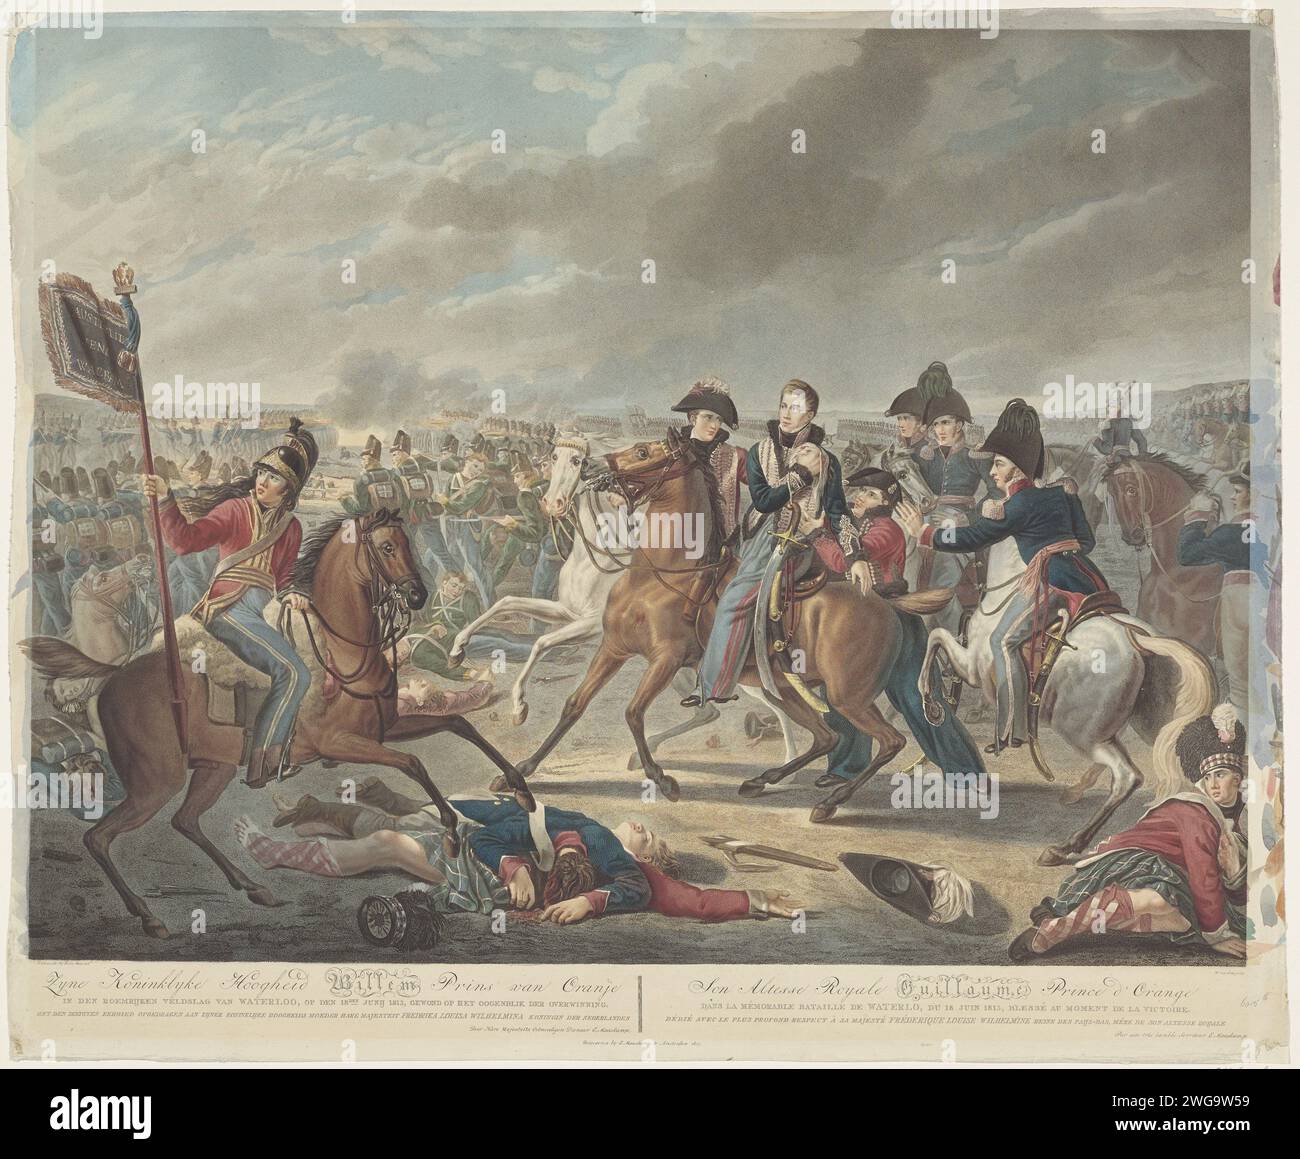 His royal highness Willem Prins van Oranje in the ramps battle of Waterloo, on the 18th of June 1815, injured at the moment of the victory / son Altesse Royale Guillaume Prince d'Orange (...), 1817 print The Prince of Orange is injured during the Battle of Waterloo, June 18, 1815. Centrally the Prince on horseback who grabs his shoulder, his staff rushes to the rescue. On the left comes a dragonder with the conquered French standard on which the names Austerlitz, Jena and Wagram. In the foreground on the right an injured Scottish soldier. print maker: Netherlandsafter painting by: Brusselspubl Stock Photo